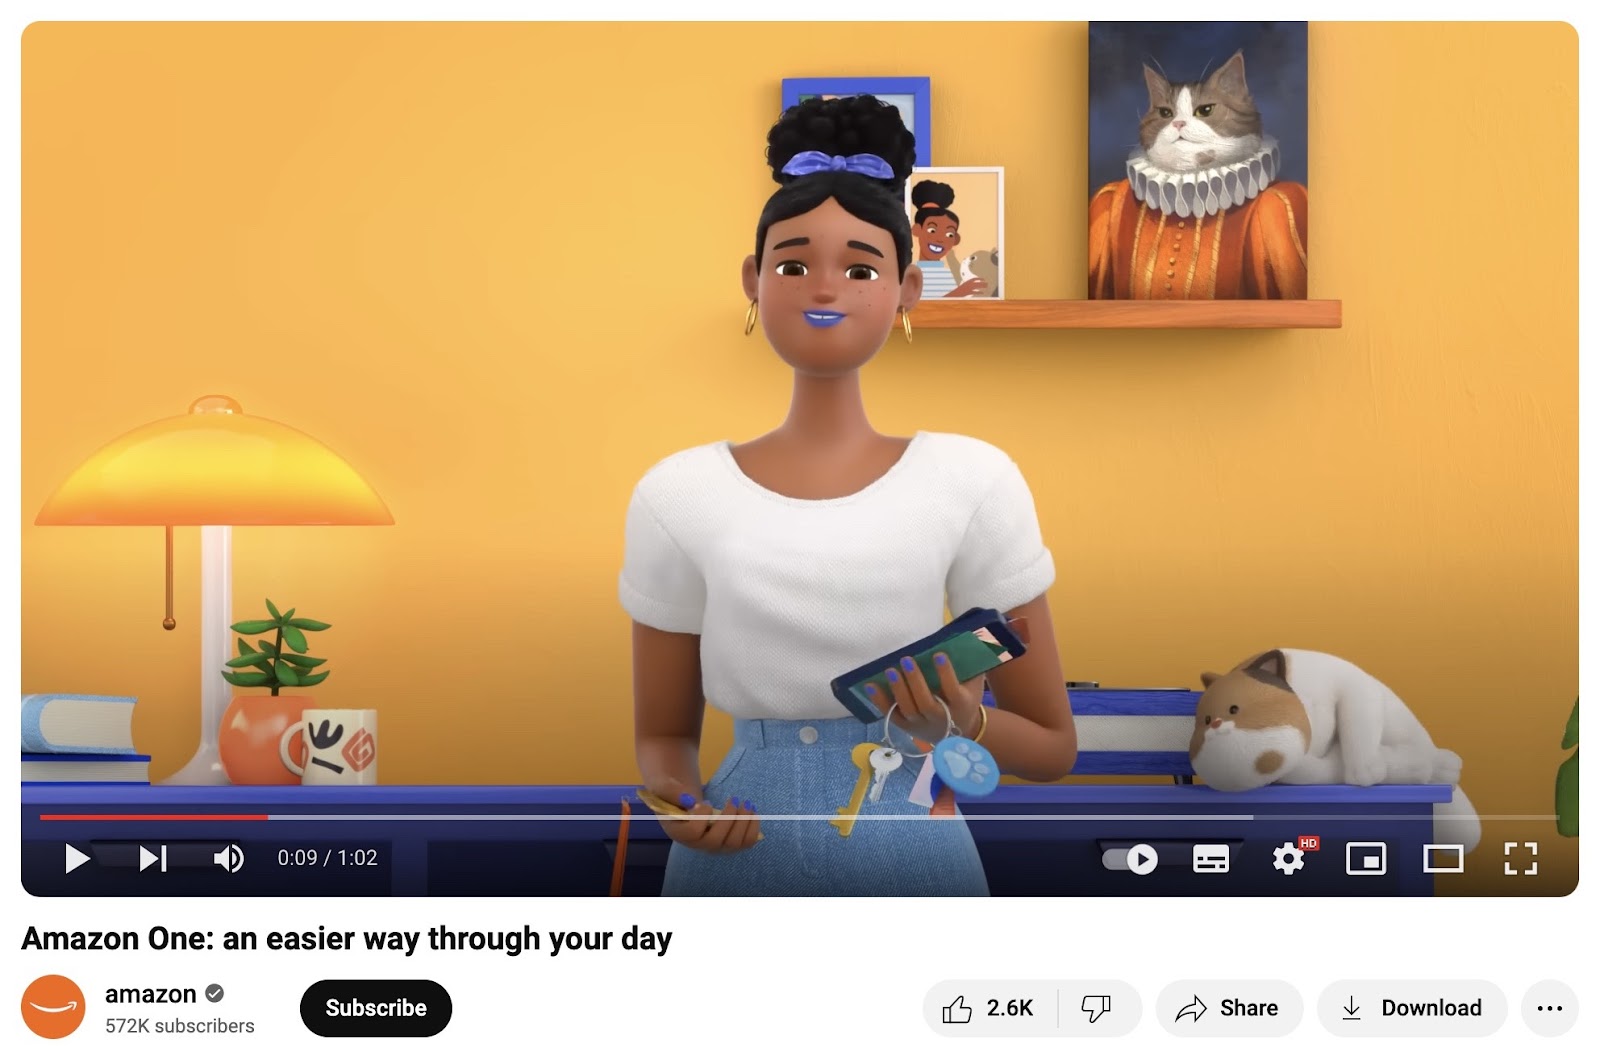 Amazon One's animated video connected  an easier mode   to get   done  your day